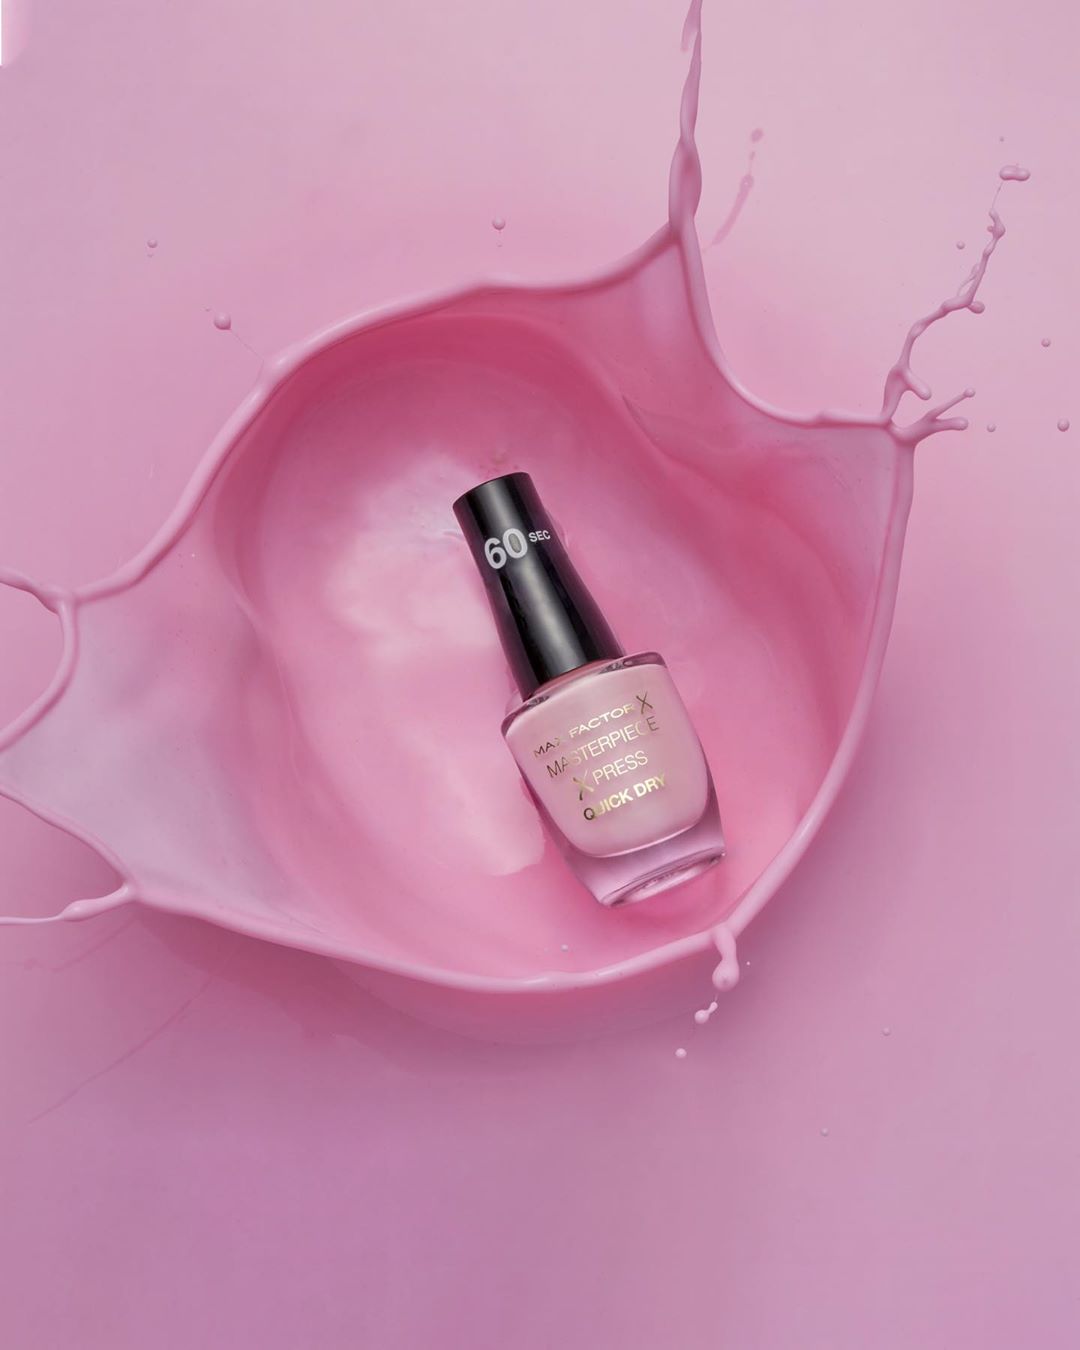 Max Factor - Made Me Blush 🌸Everyone needs a blush nude in their nail wardrobe 🙌 shop this must-have shade at @superdrug now
 
 
#XpressYourself #MasterpieceXpress
#NailsOfInstagram #NailInspo #Nails...